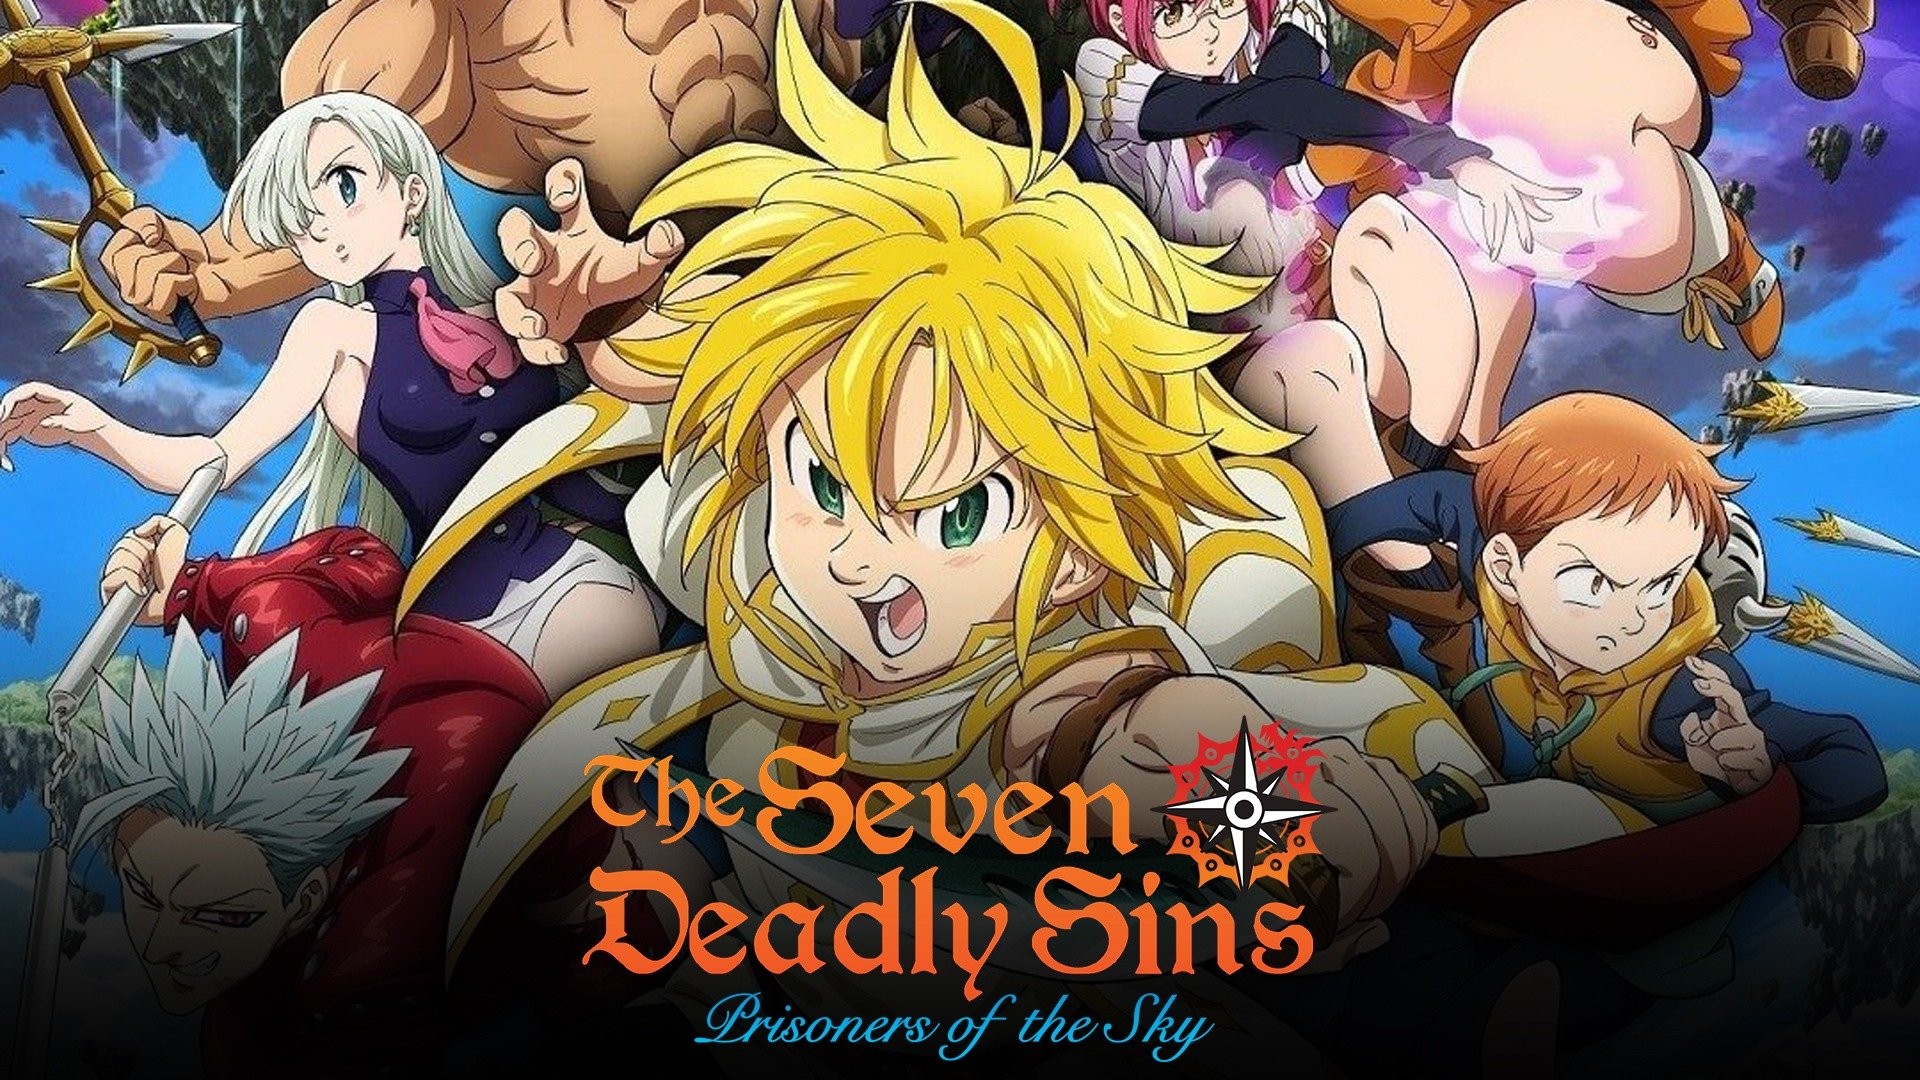 The Seven Deadly Sins the Movie: Prisoners of the Sky - Wikipedia